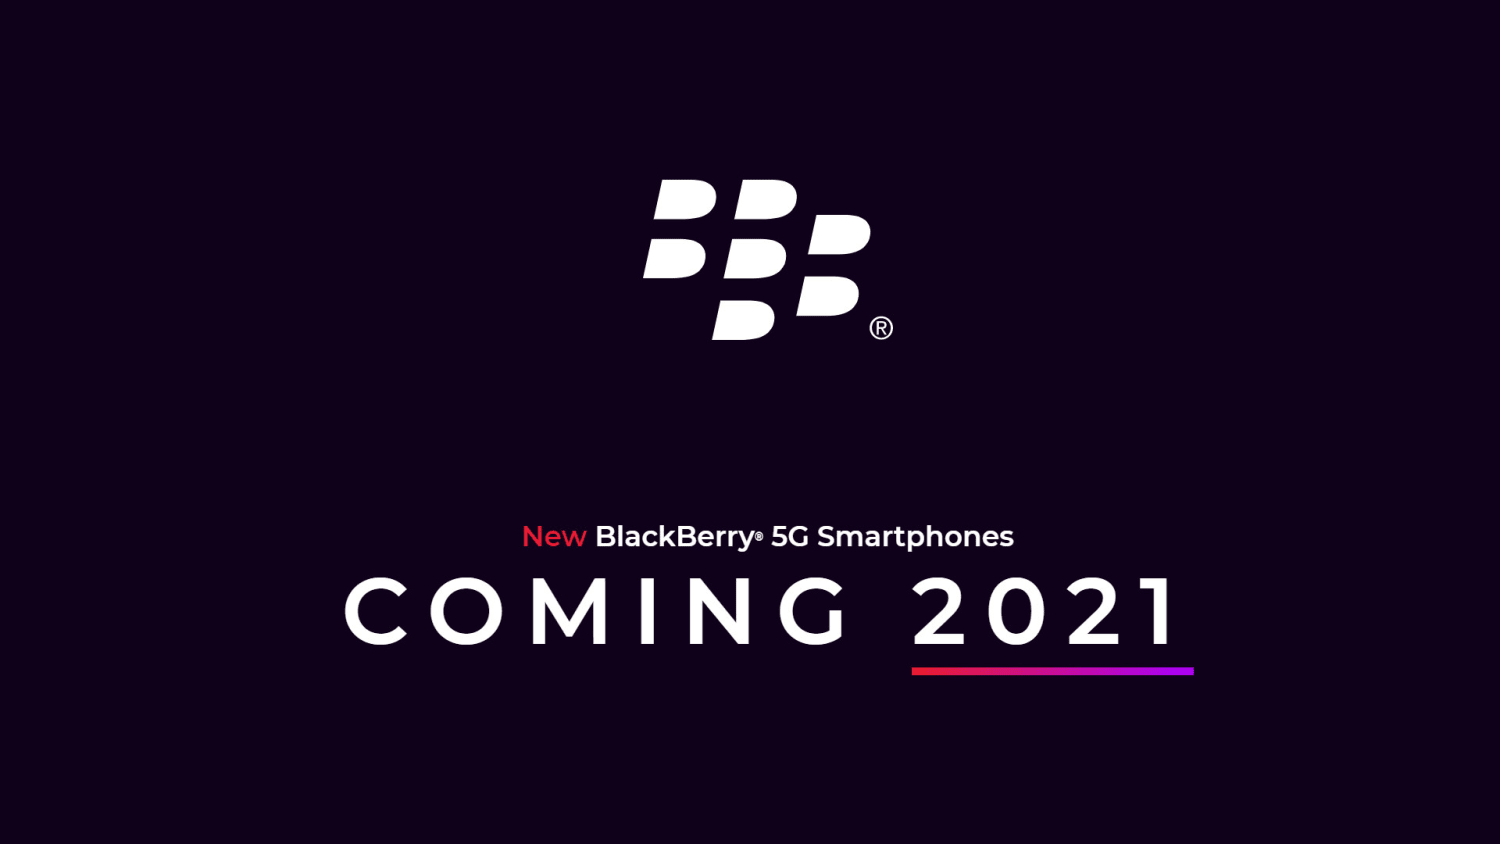 BlackBerry To Return To The Smartphone Race, 5G Smartphone With QWERTY Keyboard To Release In 2021 - Latest Tech News, Reviews, Tips And Tutorials